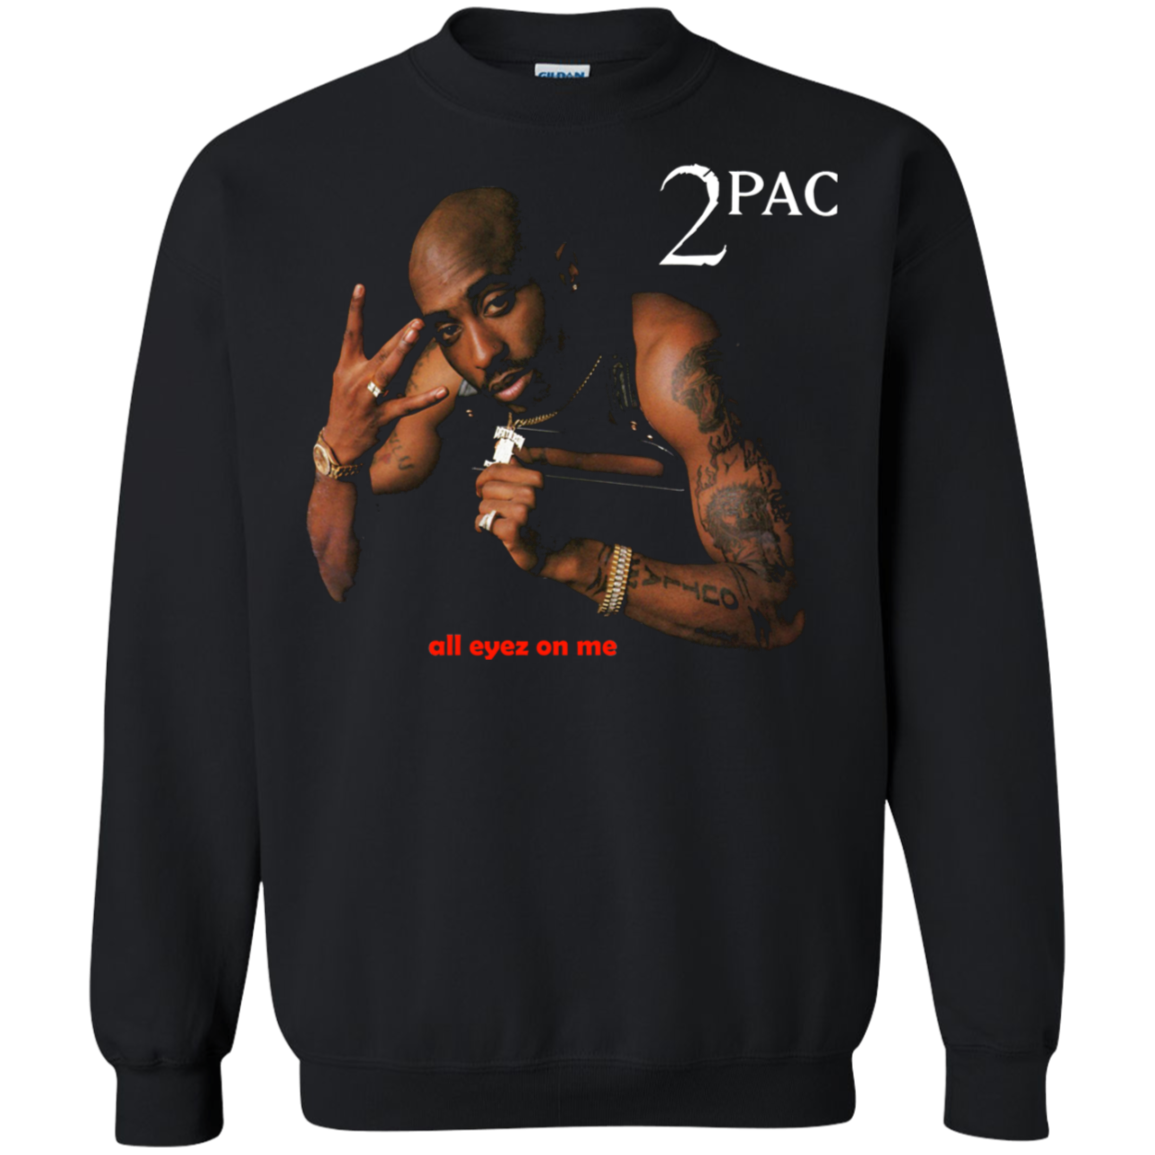 2pac all eyez on me remastered